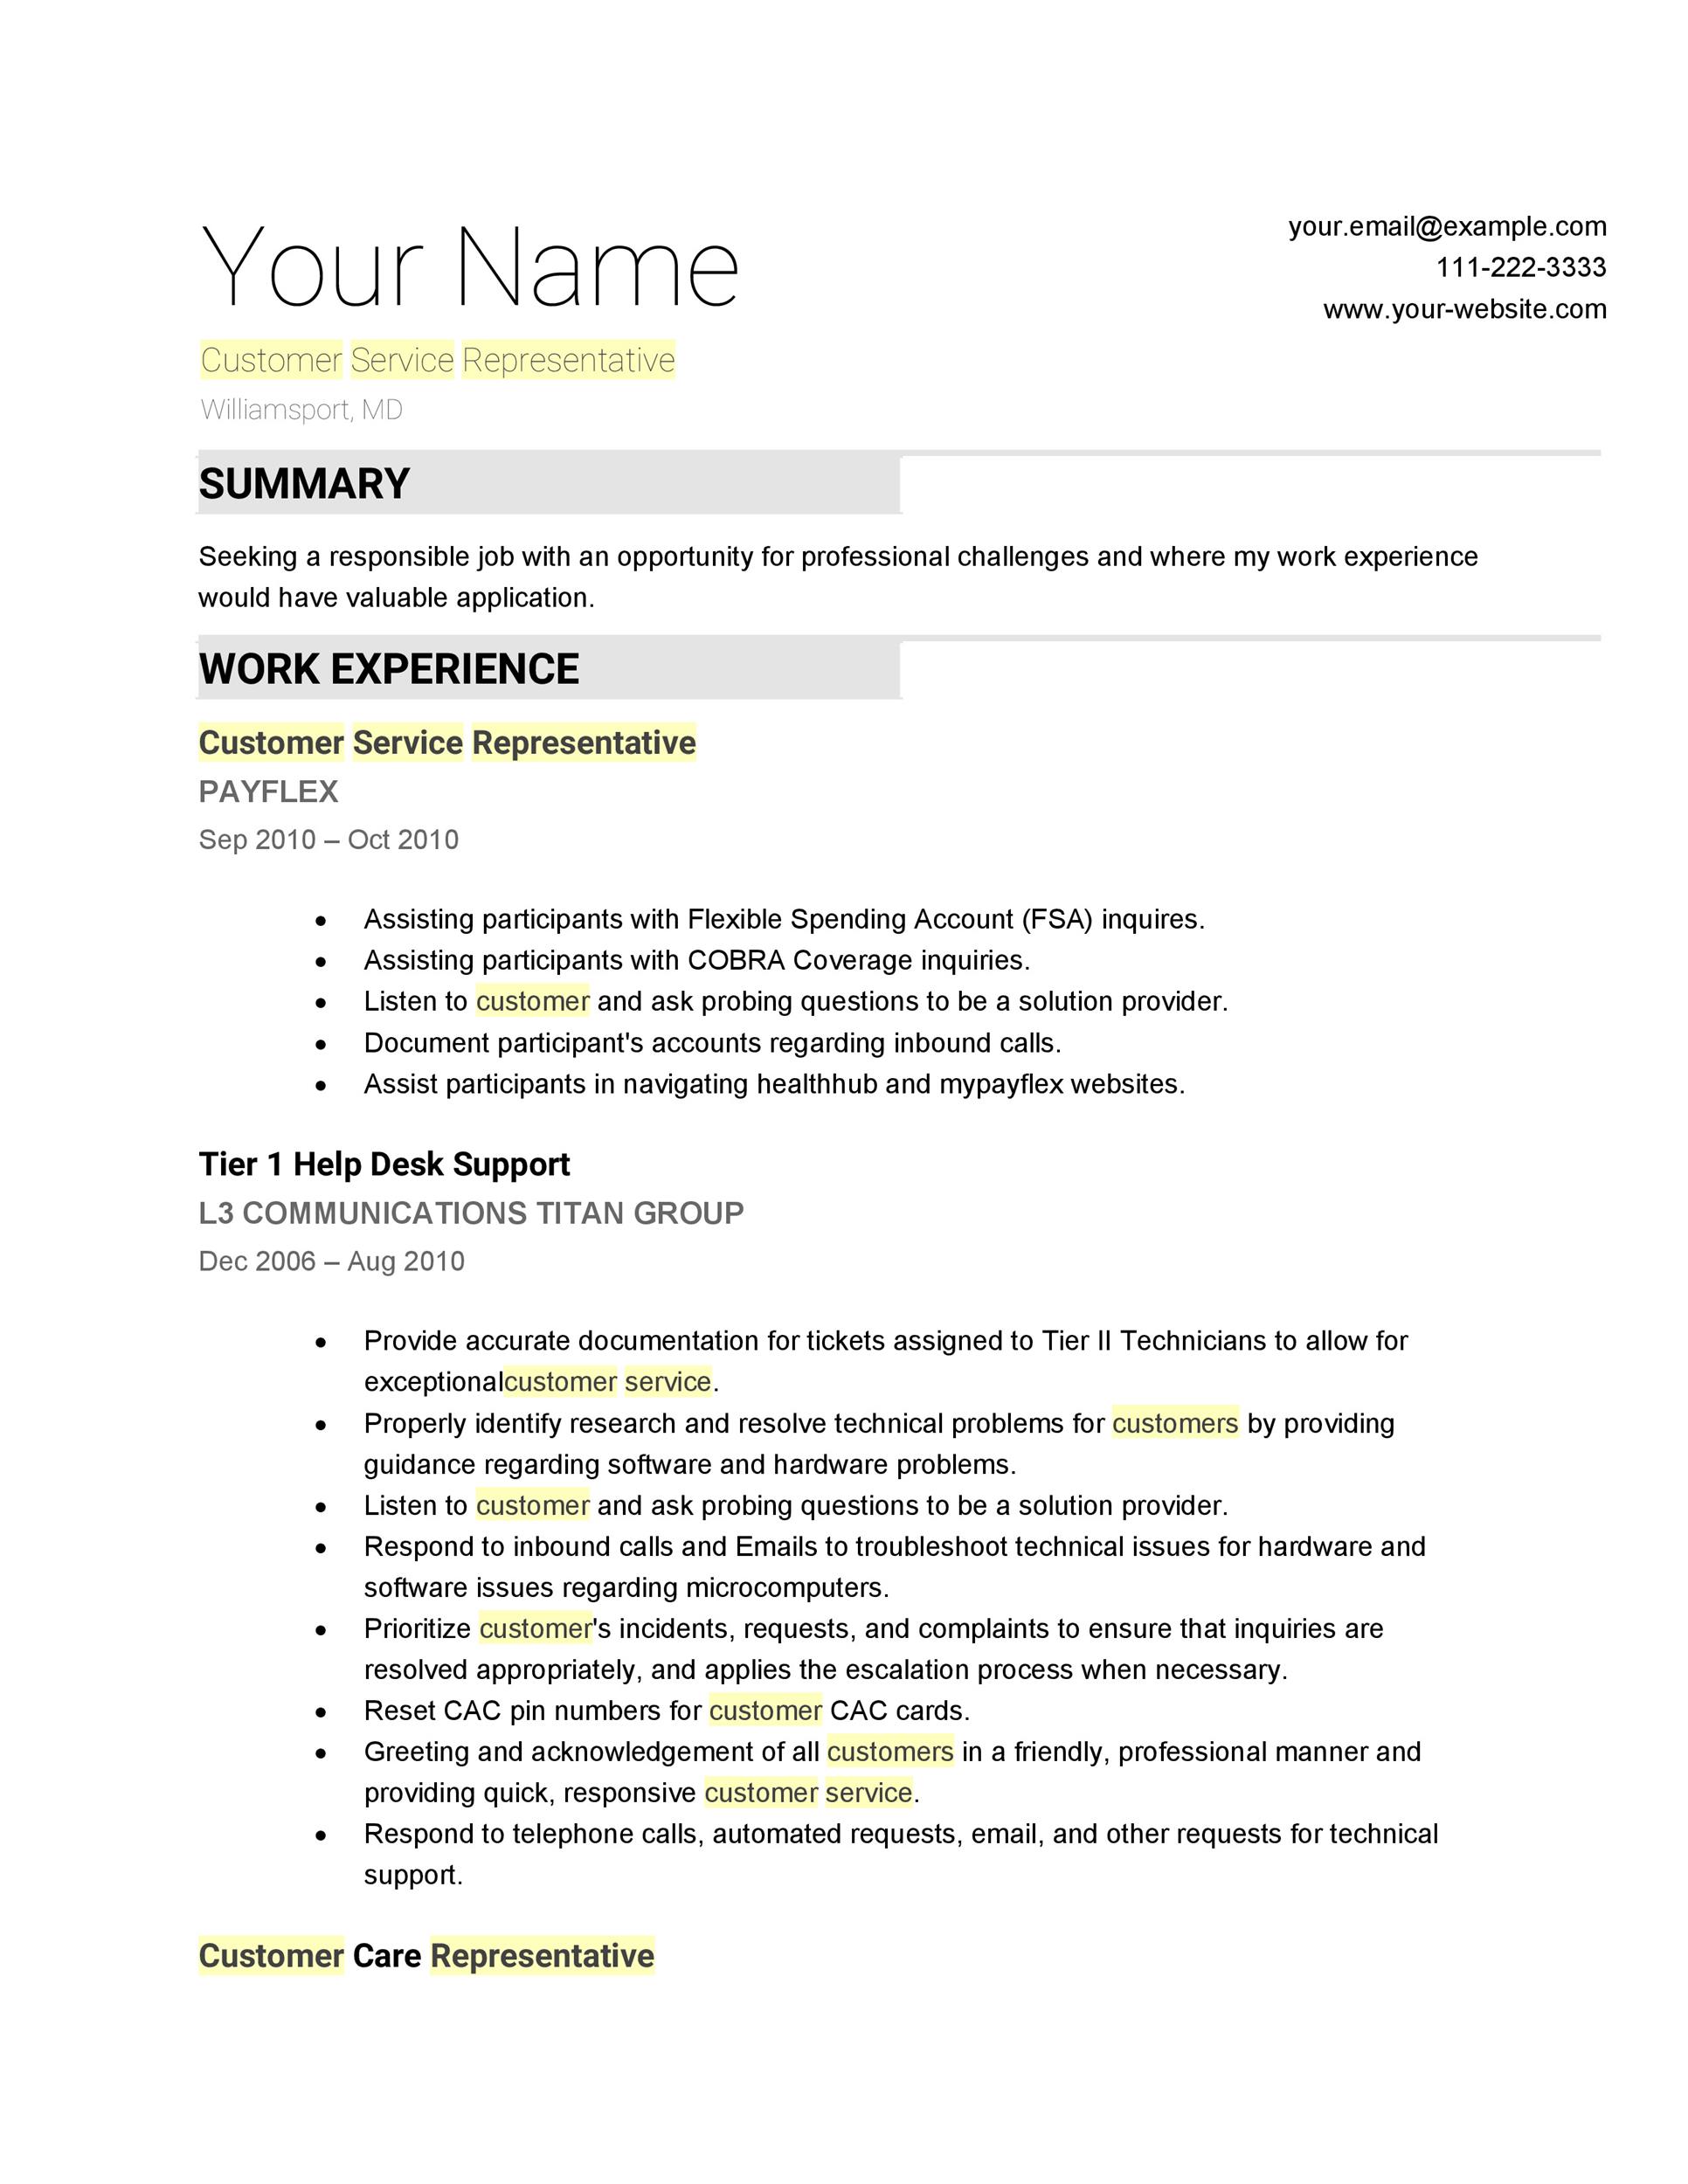 Resume Examples And Samples Customer Service  Customer Service